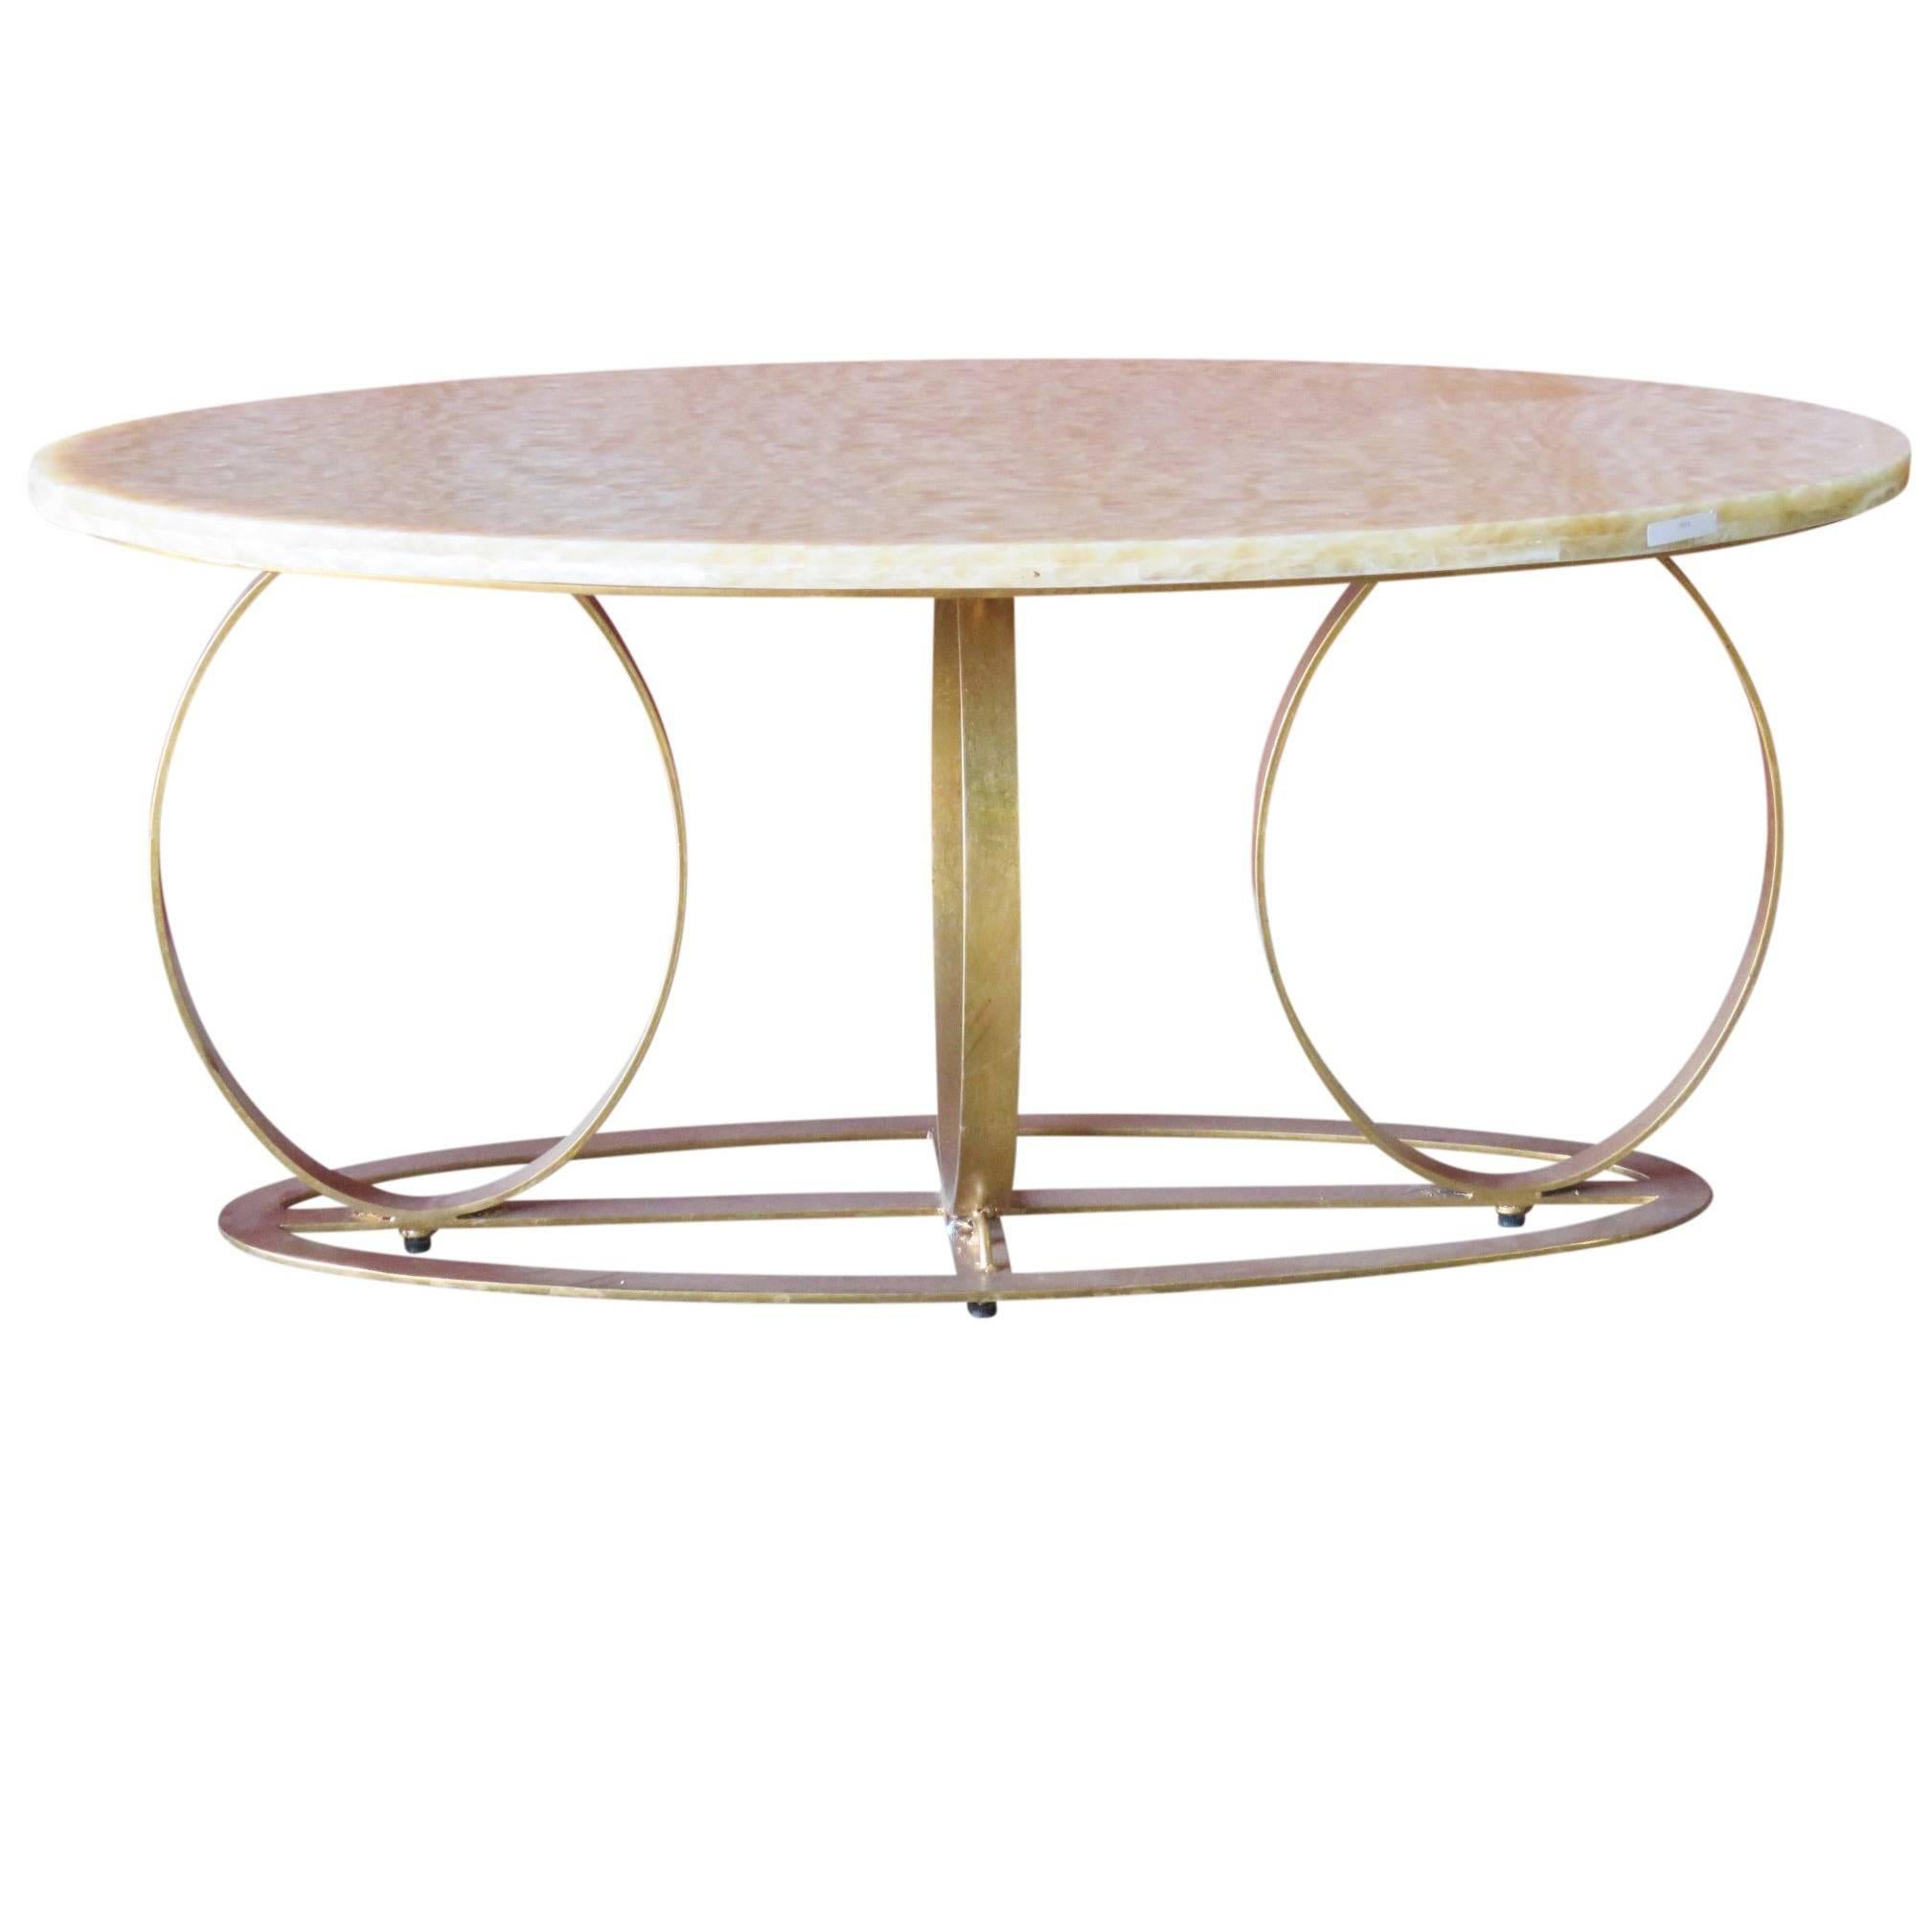 Modern Design Gilt Painted Marble-Top Coffee Table